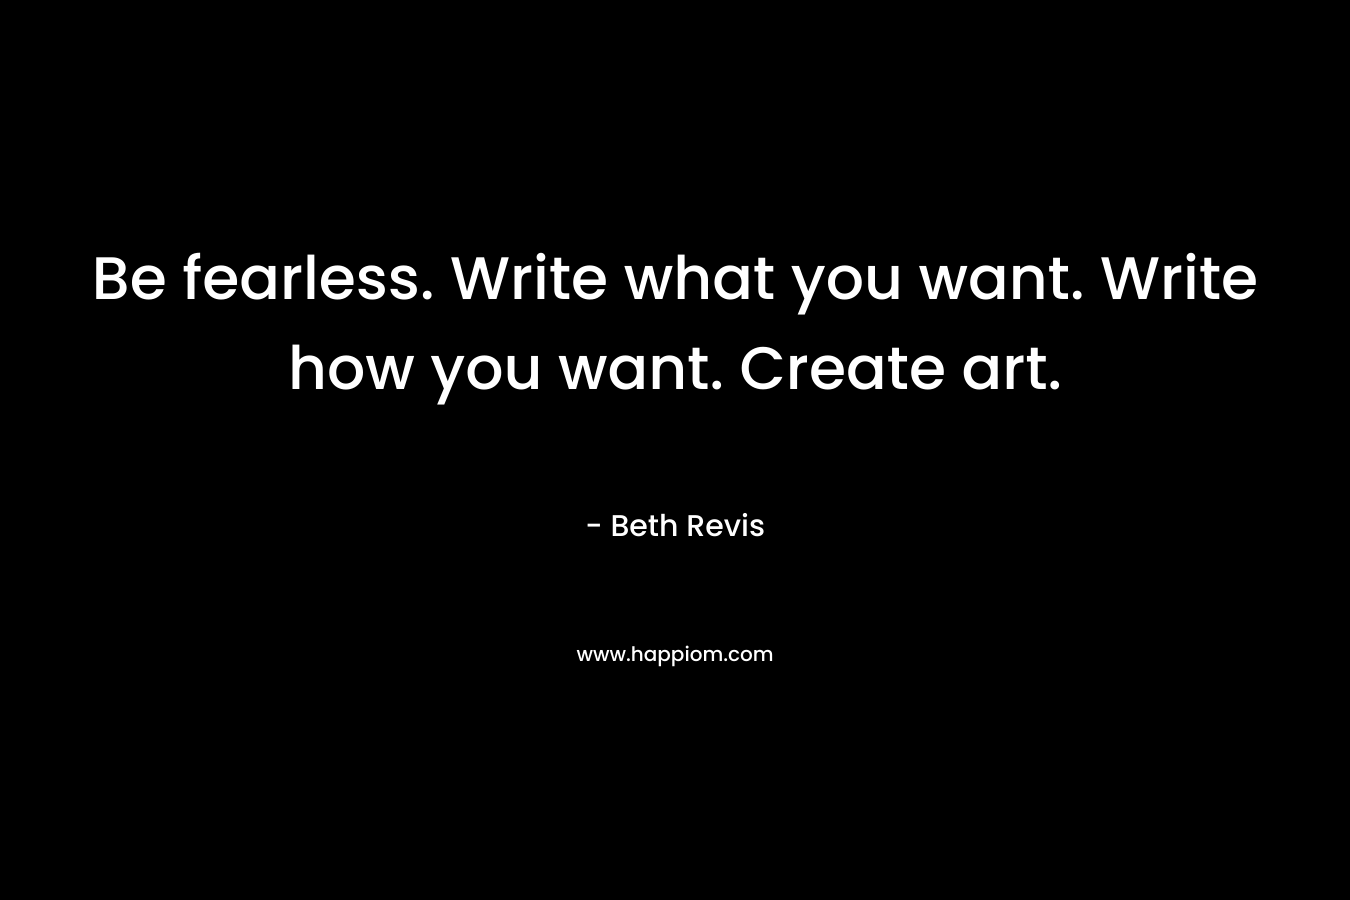 Be fearless. Write what you want. Write how you want. Create art.